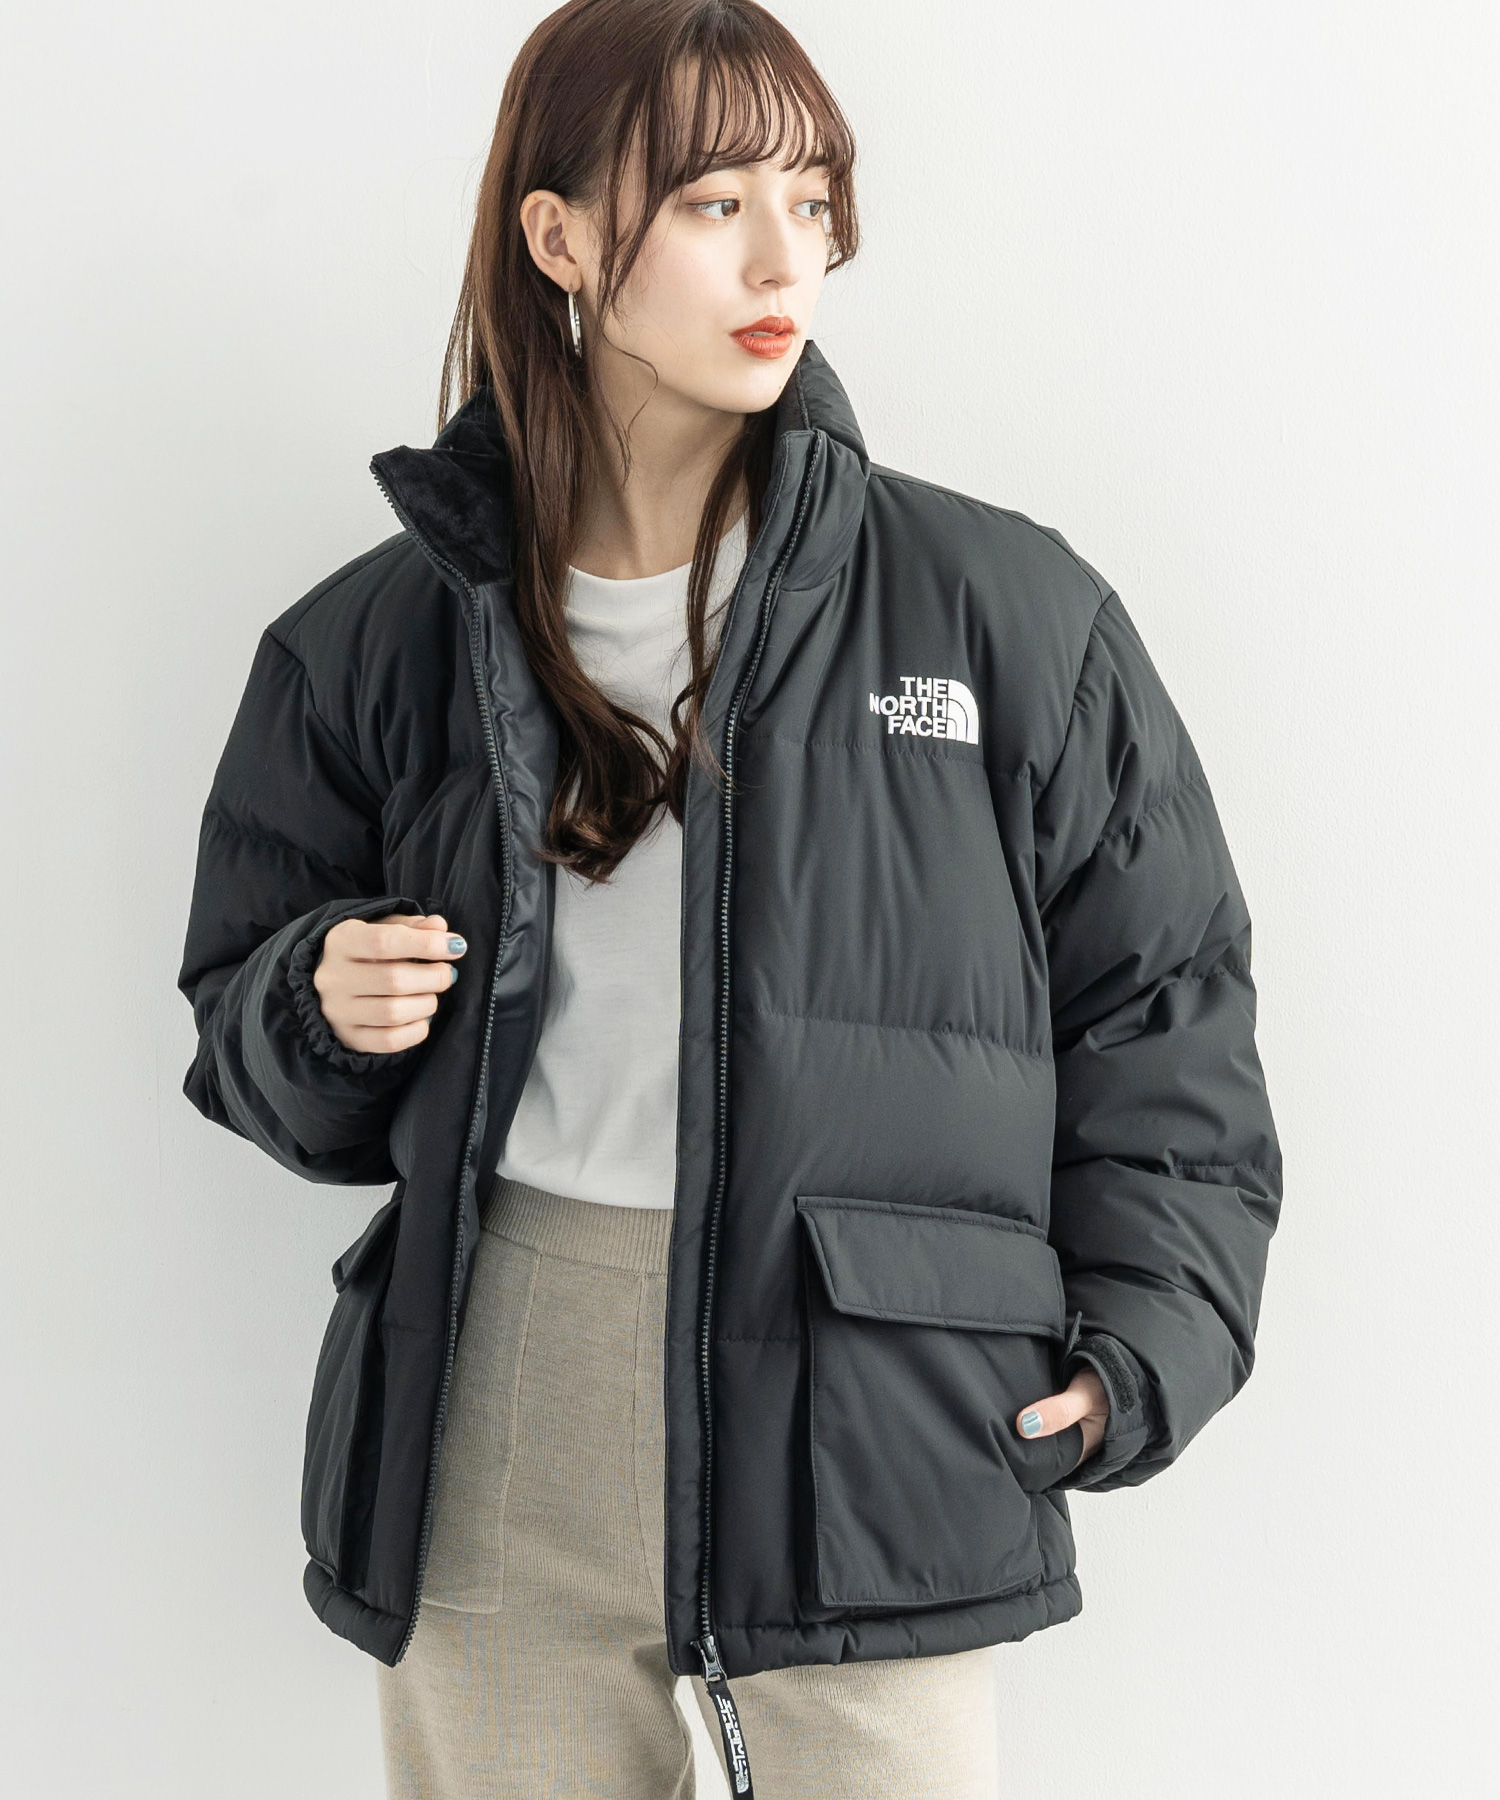 THE NORTH FACE YOUTRO PUFFER DOWN JACKET www.krzysztofbialy.com